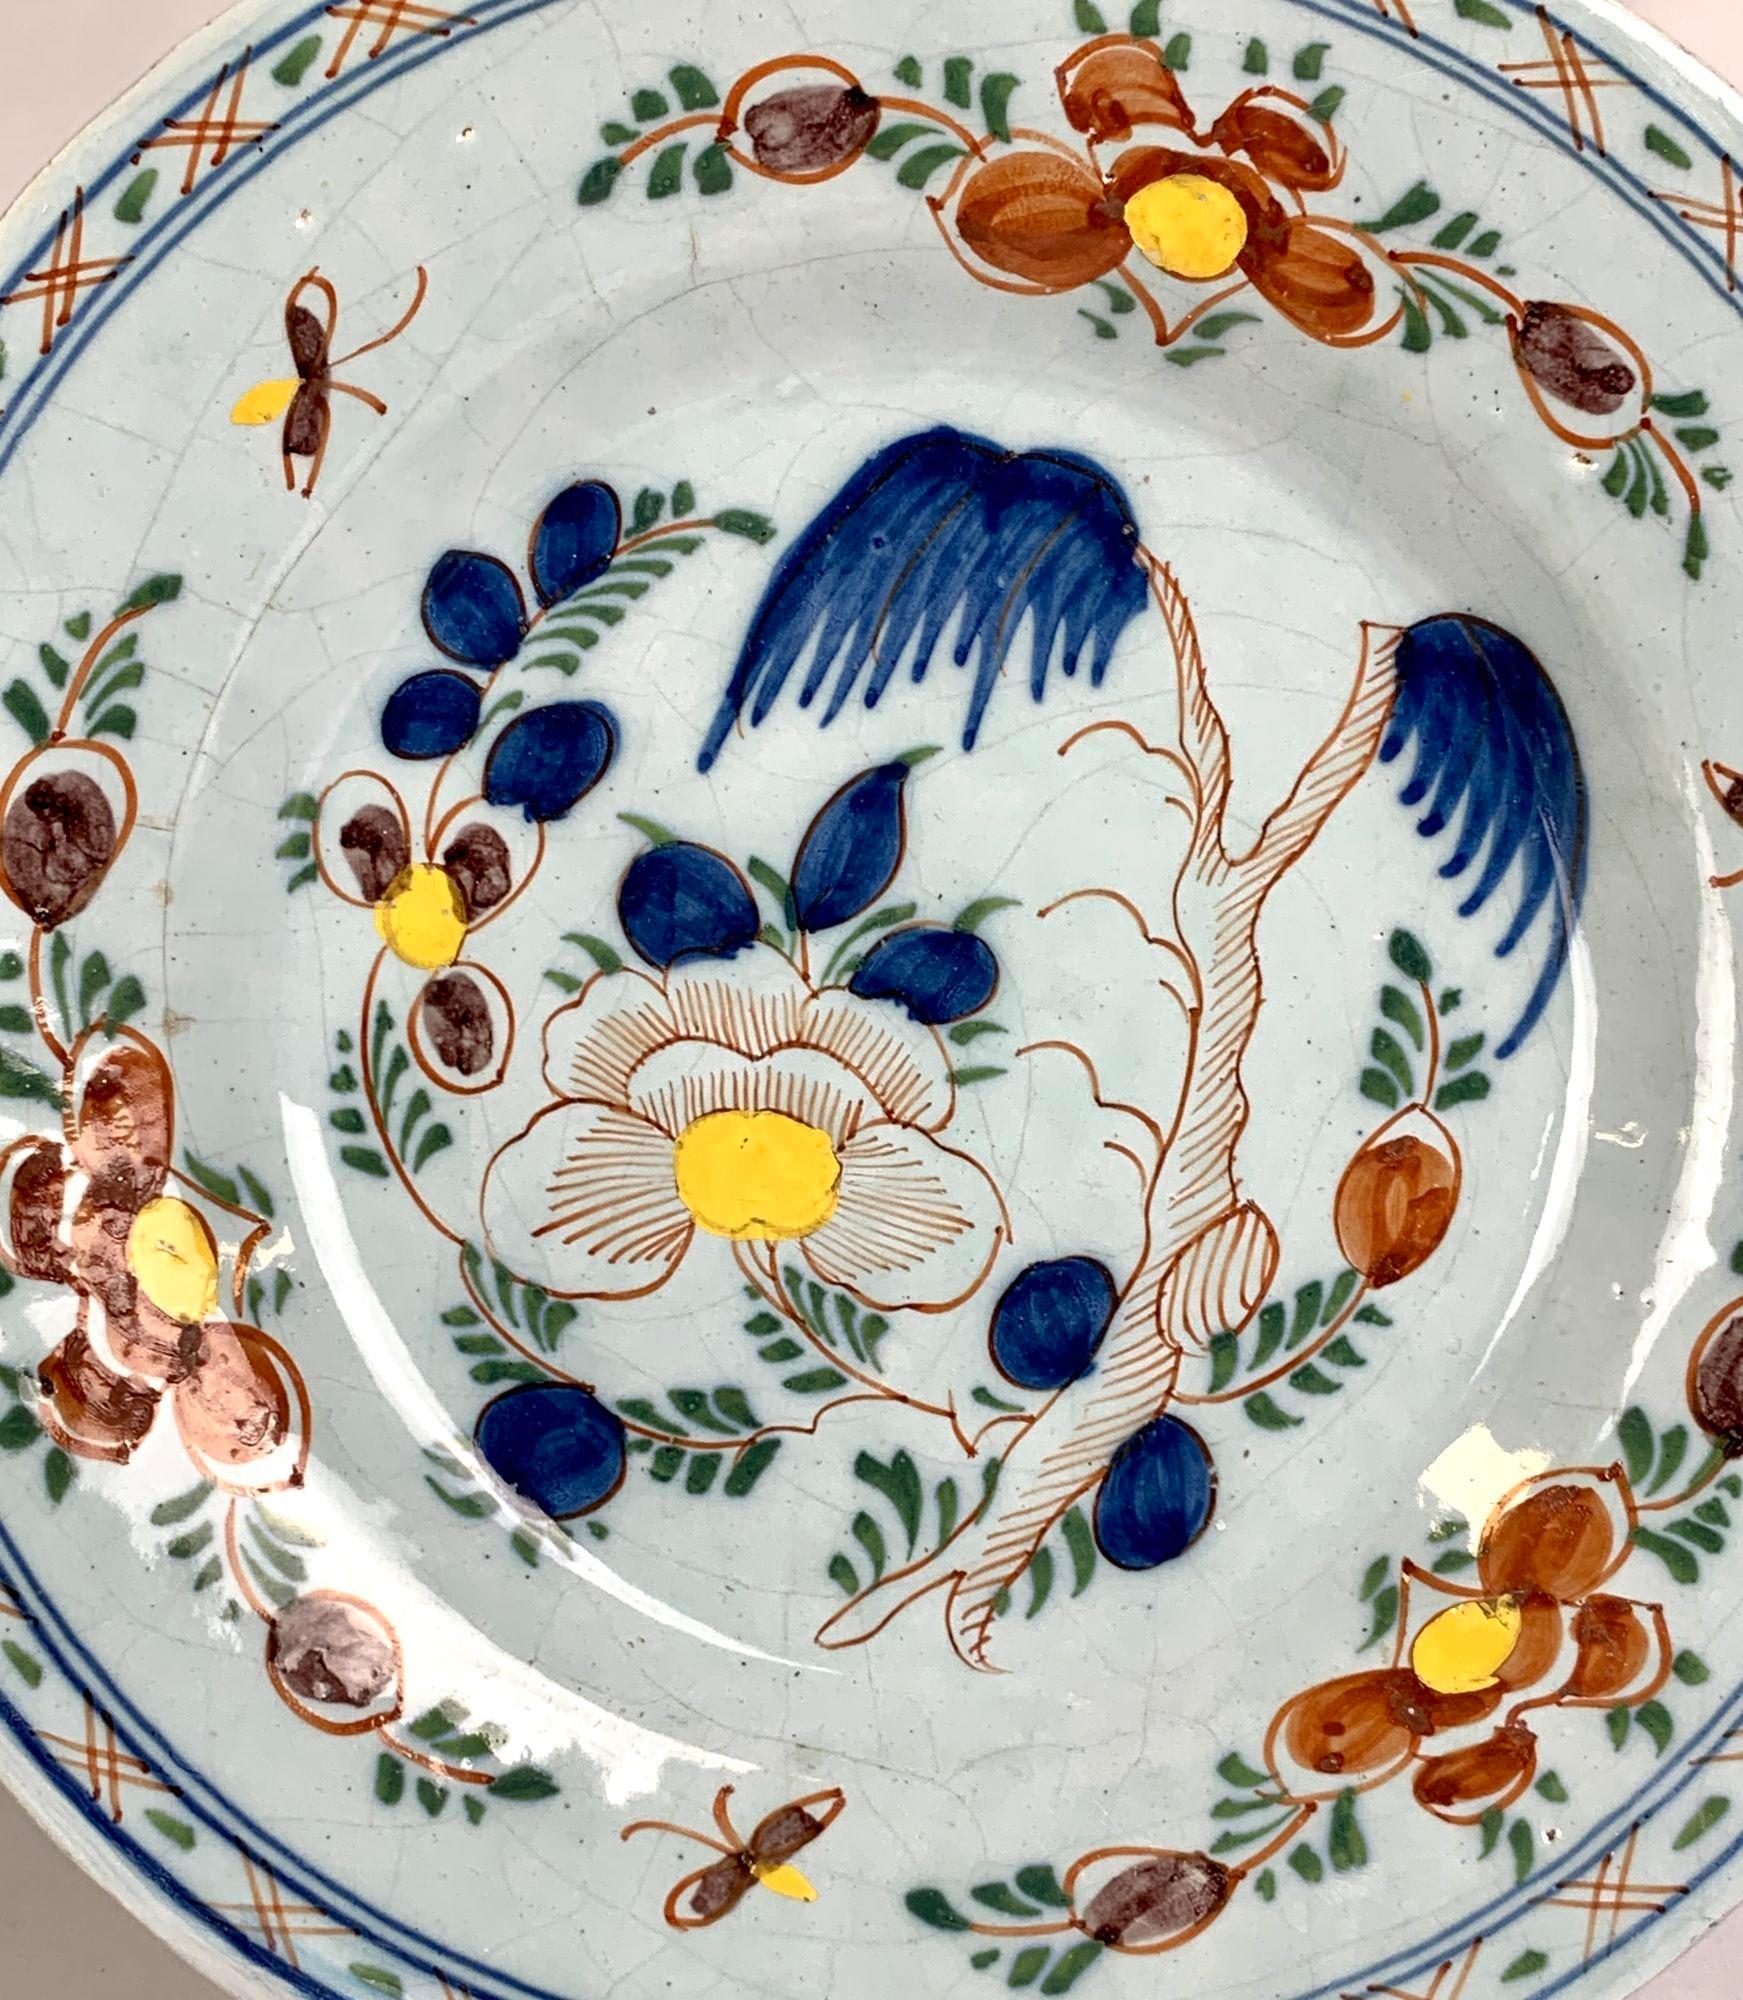 The center of this hand painted Dutch Delft plate shows a lovely garden with a pine tree and a large peony.
The scene continues onto the border, where we see three butterflies and more peonies.
The border is decorated with a band of iron red